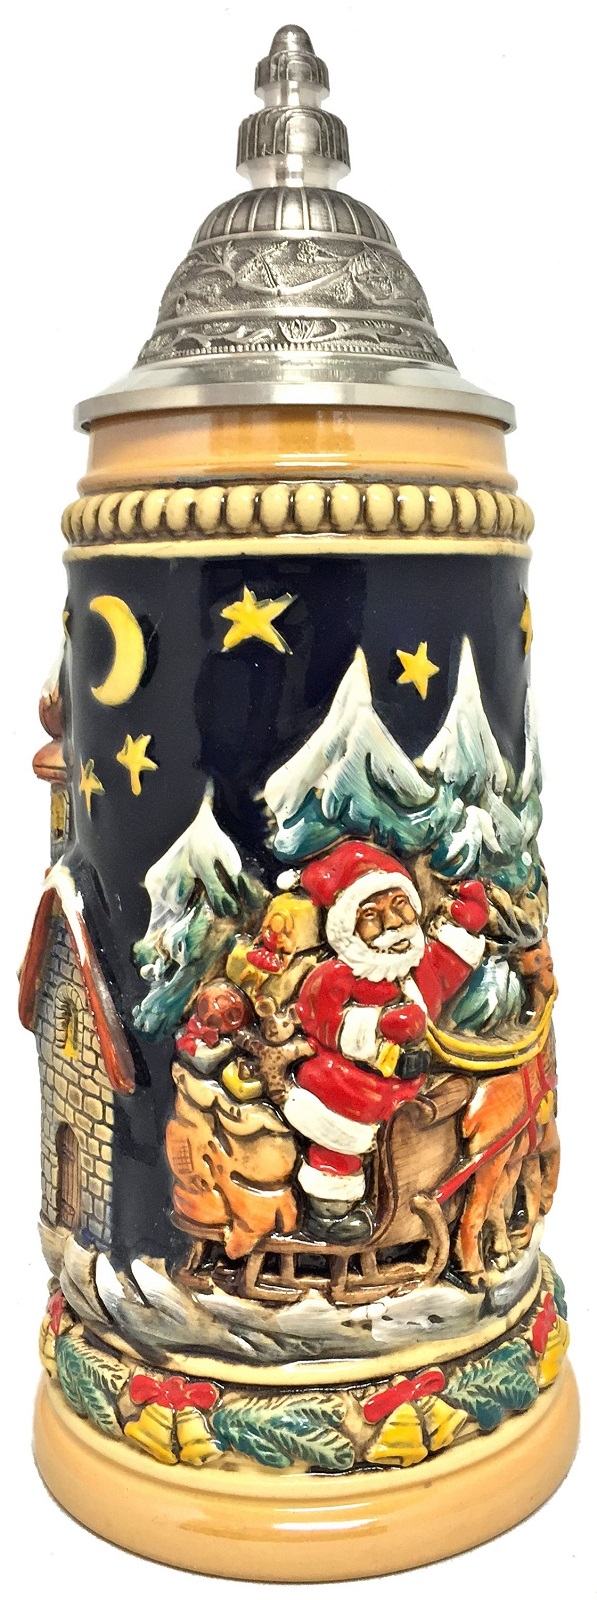 Santa Claus Riding His Sleigh with Reindeer LE Christmas German Beer Stein .5 L